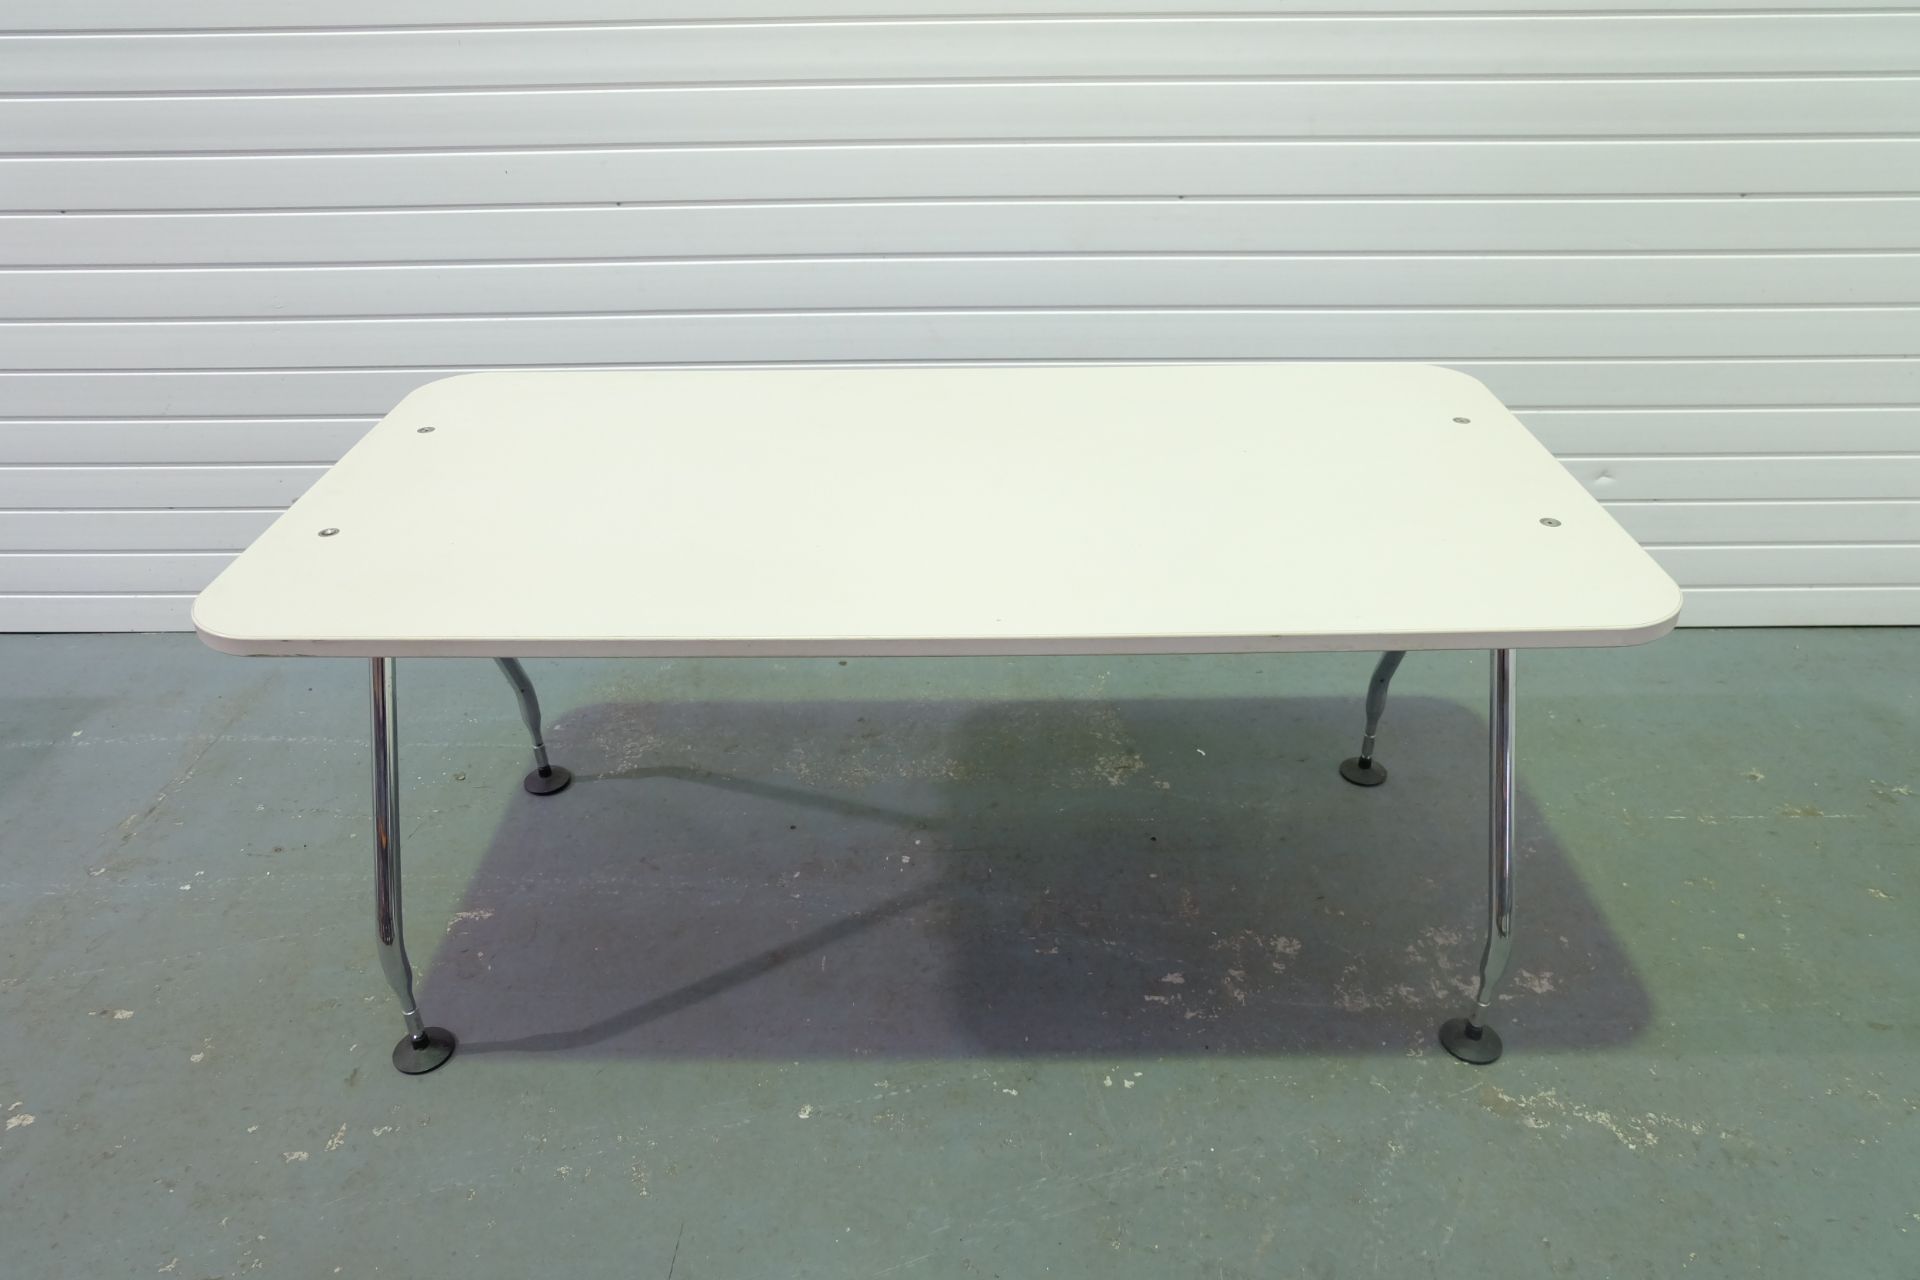 Table With Adjustable Chrome Legs. Size 1600mm x 800mm x 720mm High.